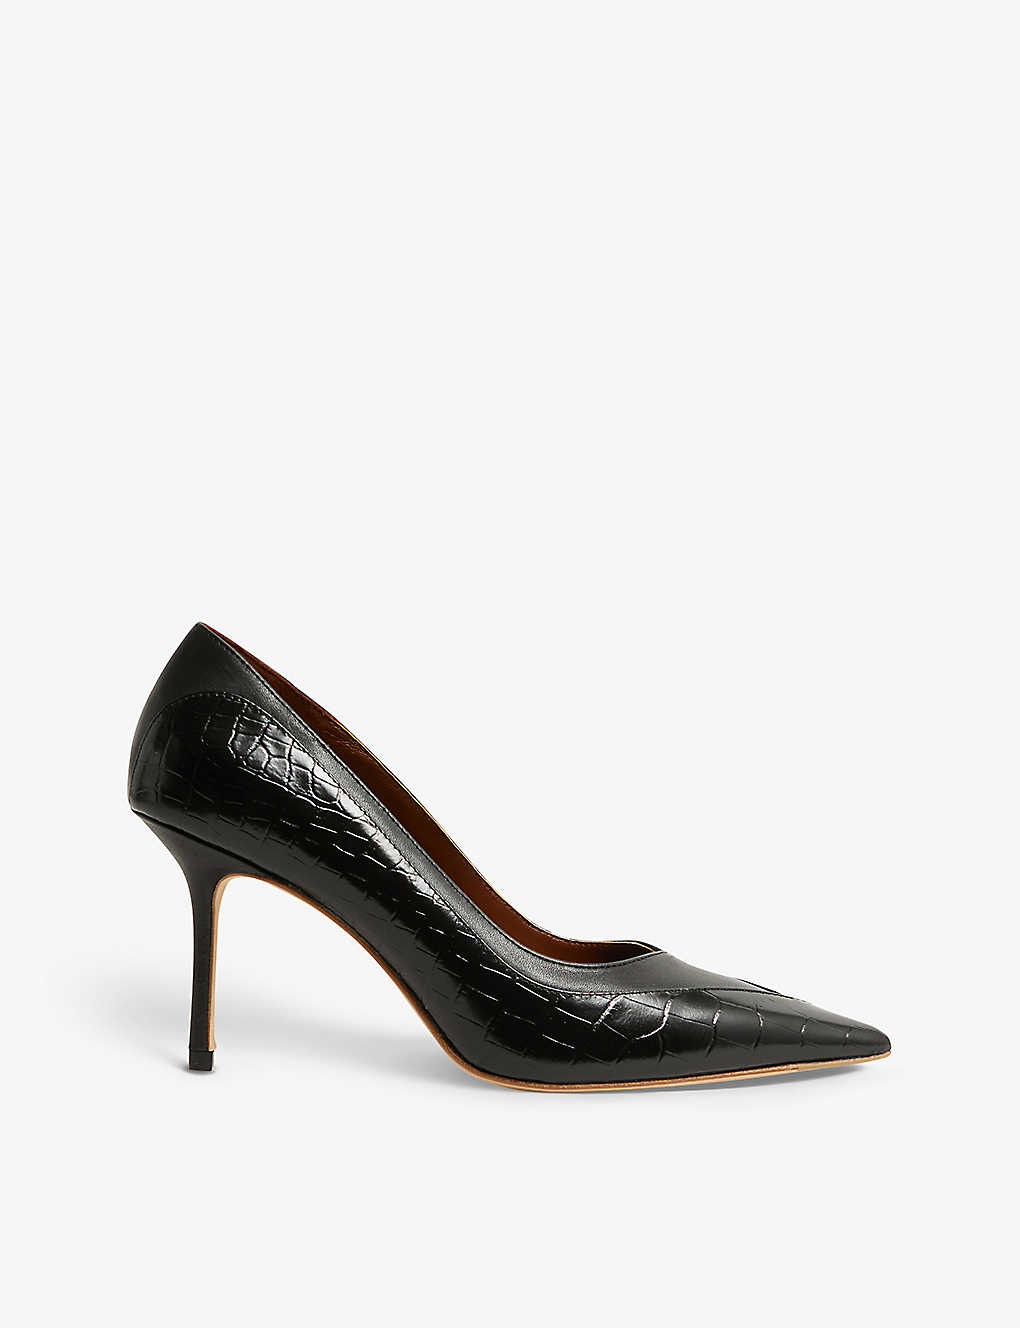 Shop Reiss Women's Black Gwyneth Croc-embossed Leather Heeled Courts